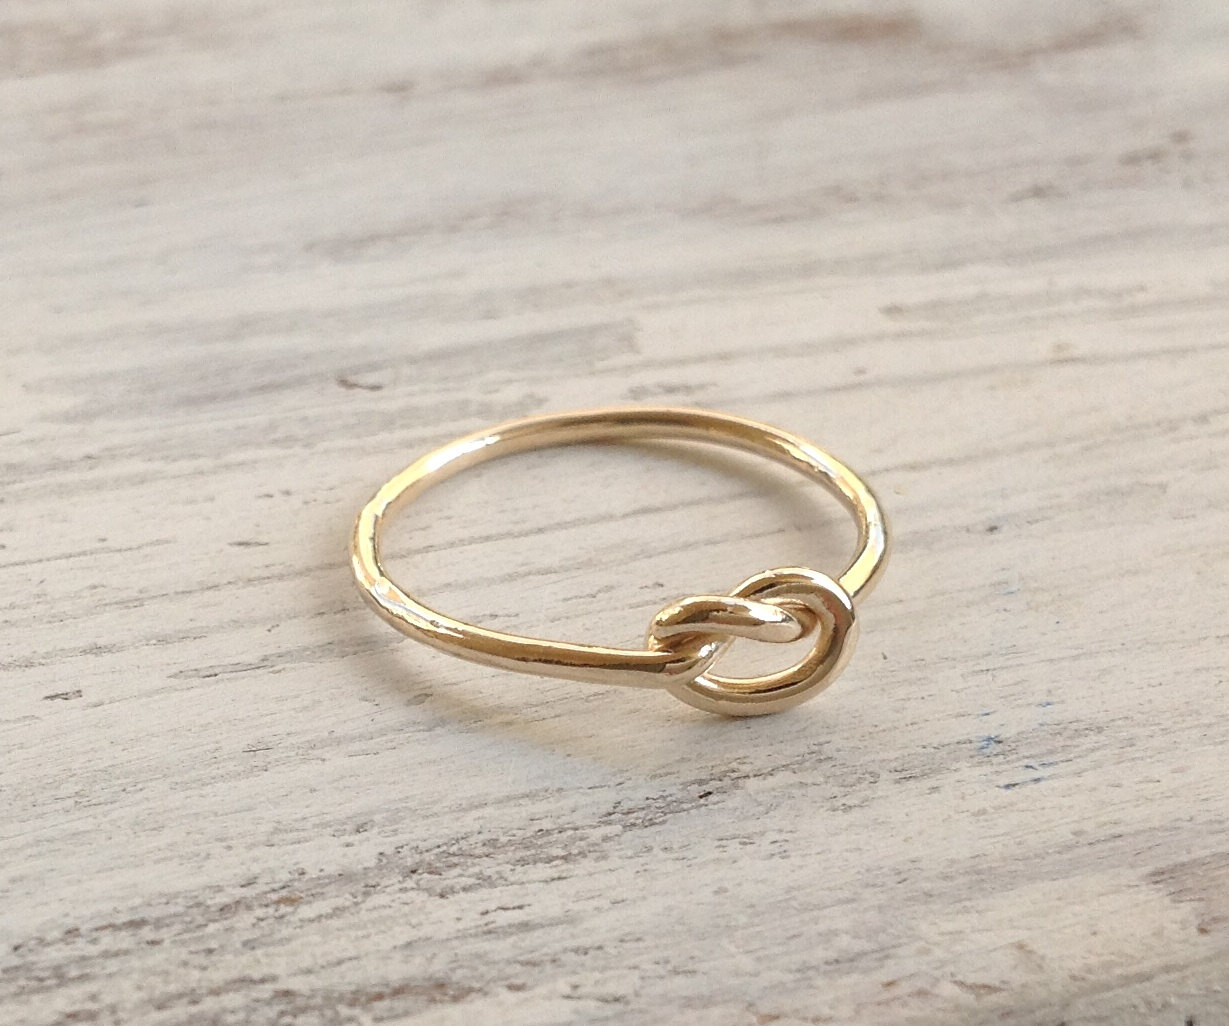 Knot Ring, Infinity Knot, Gold Ring, Knot Knuckle Ring, Above Knuckle Ring, Knuckle Ring, Friendship Ring - 1003